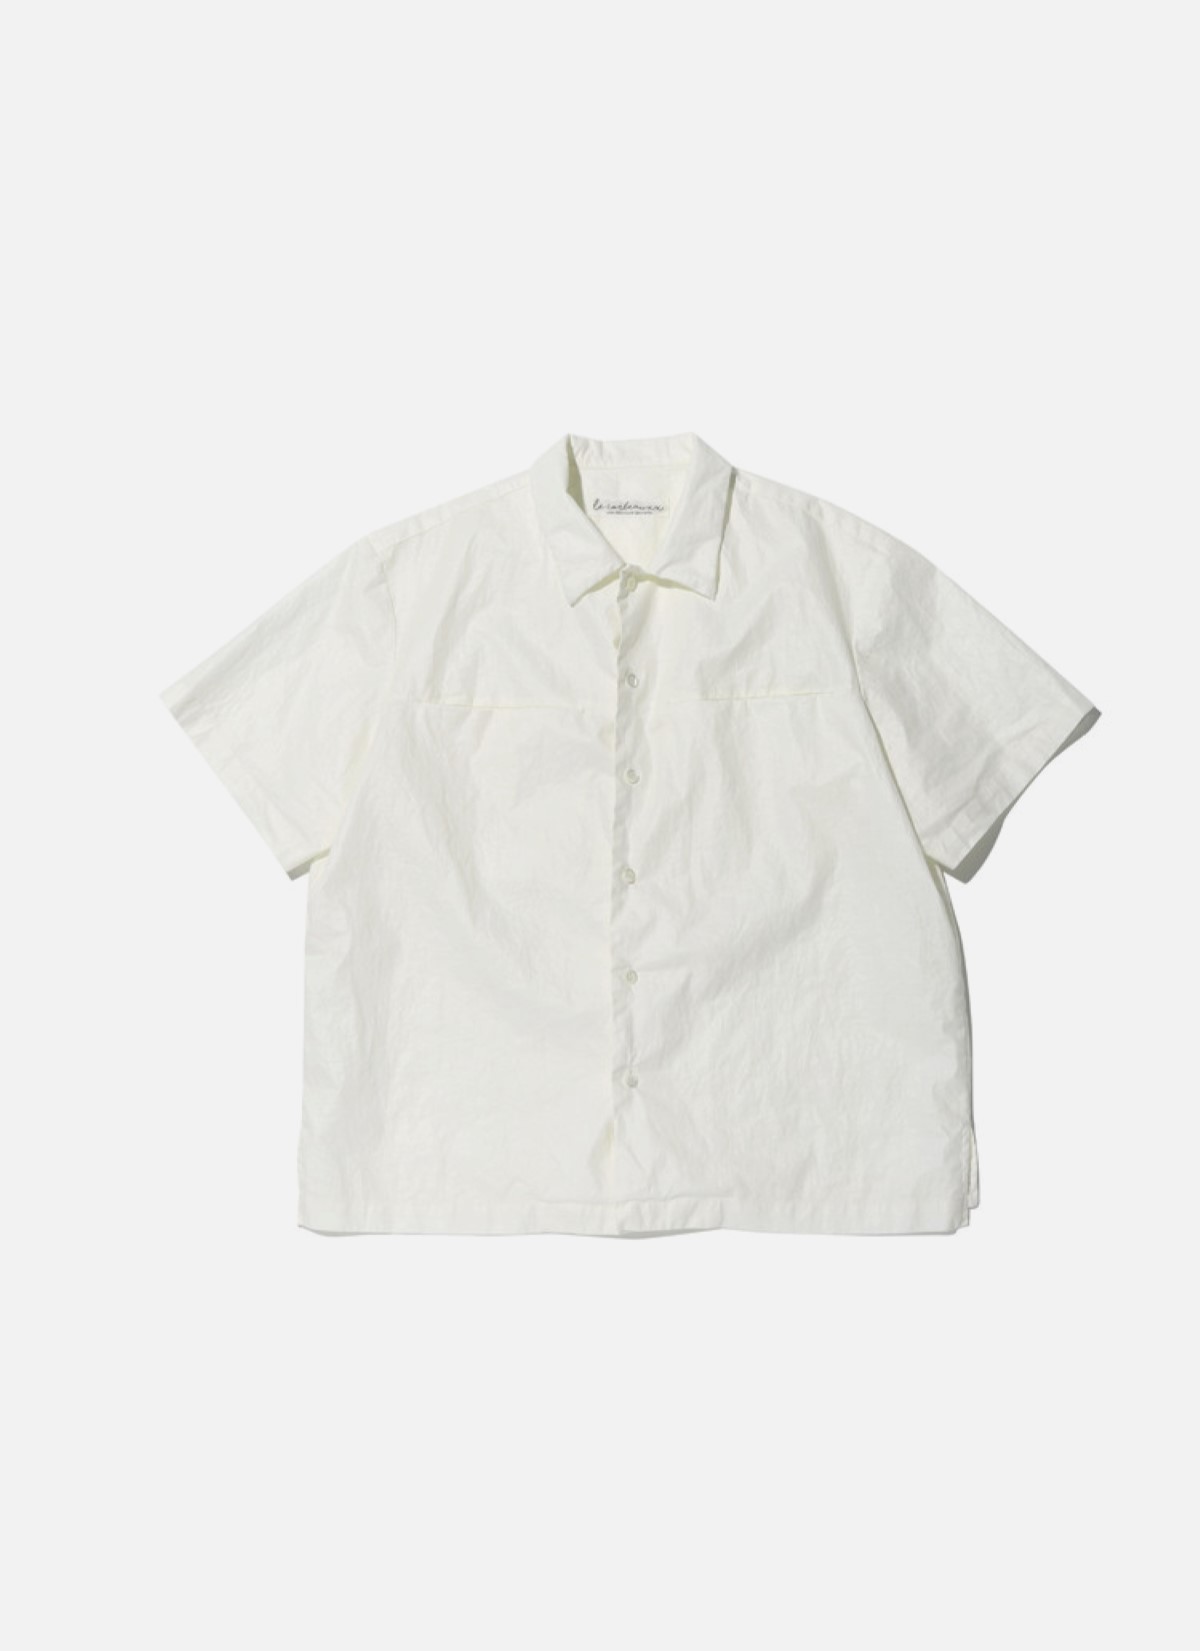 Waxed linen shirts offwhite (Tailor made)